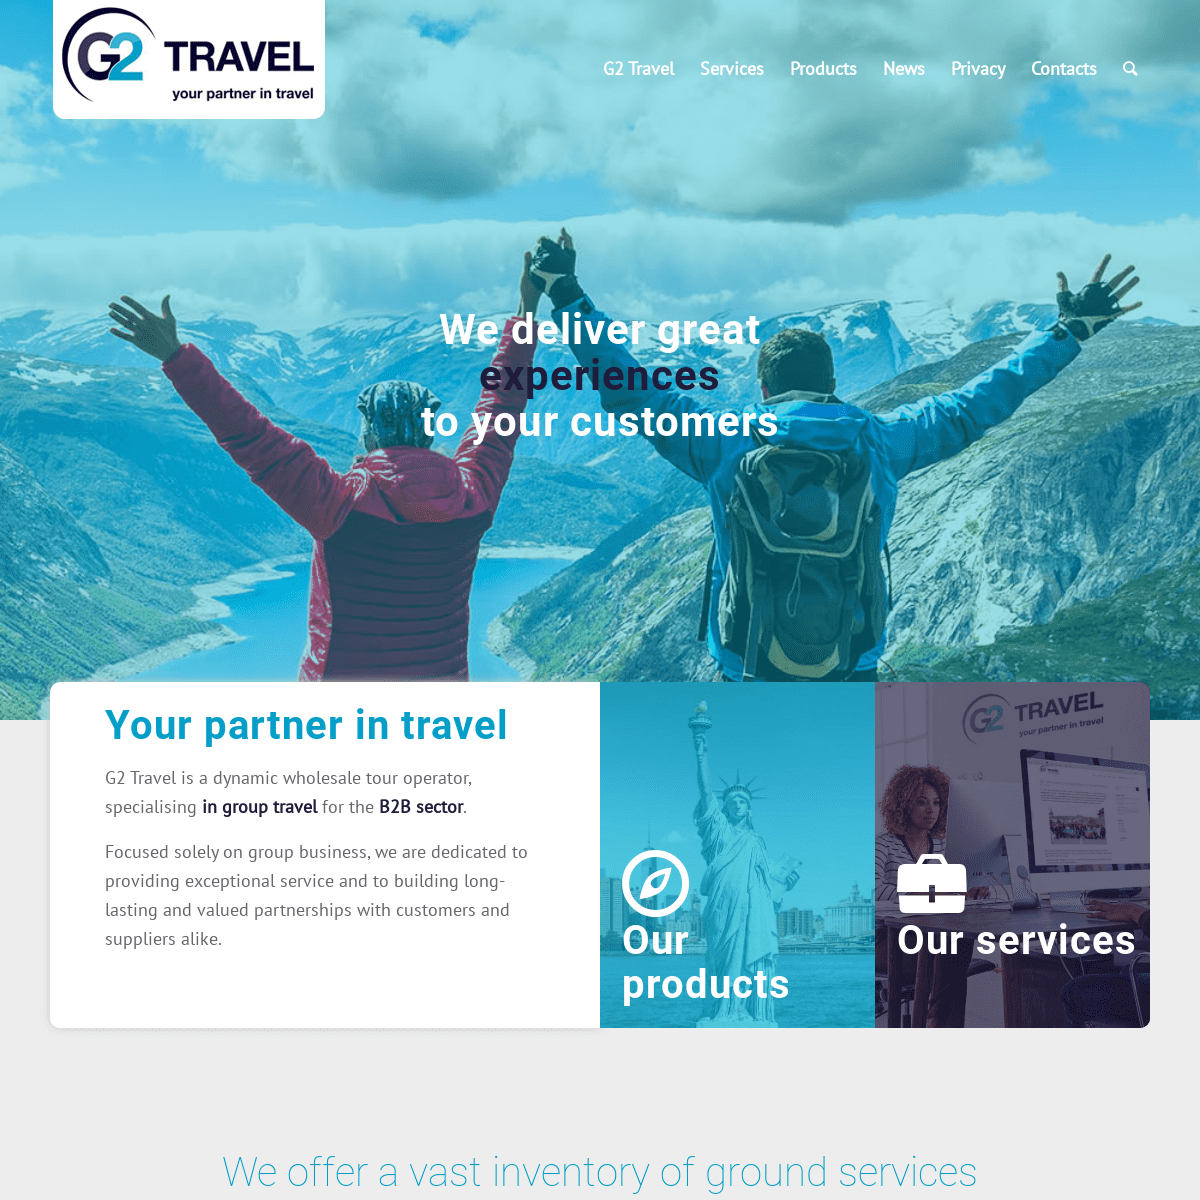 A complete backup of g2-travel.com